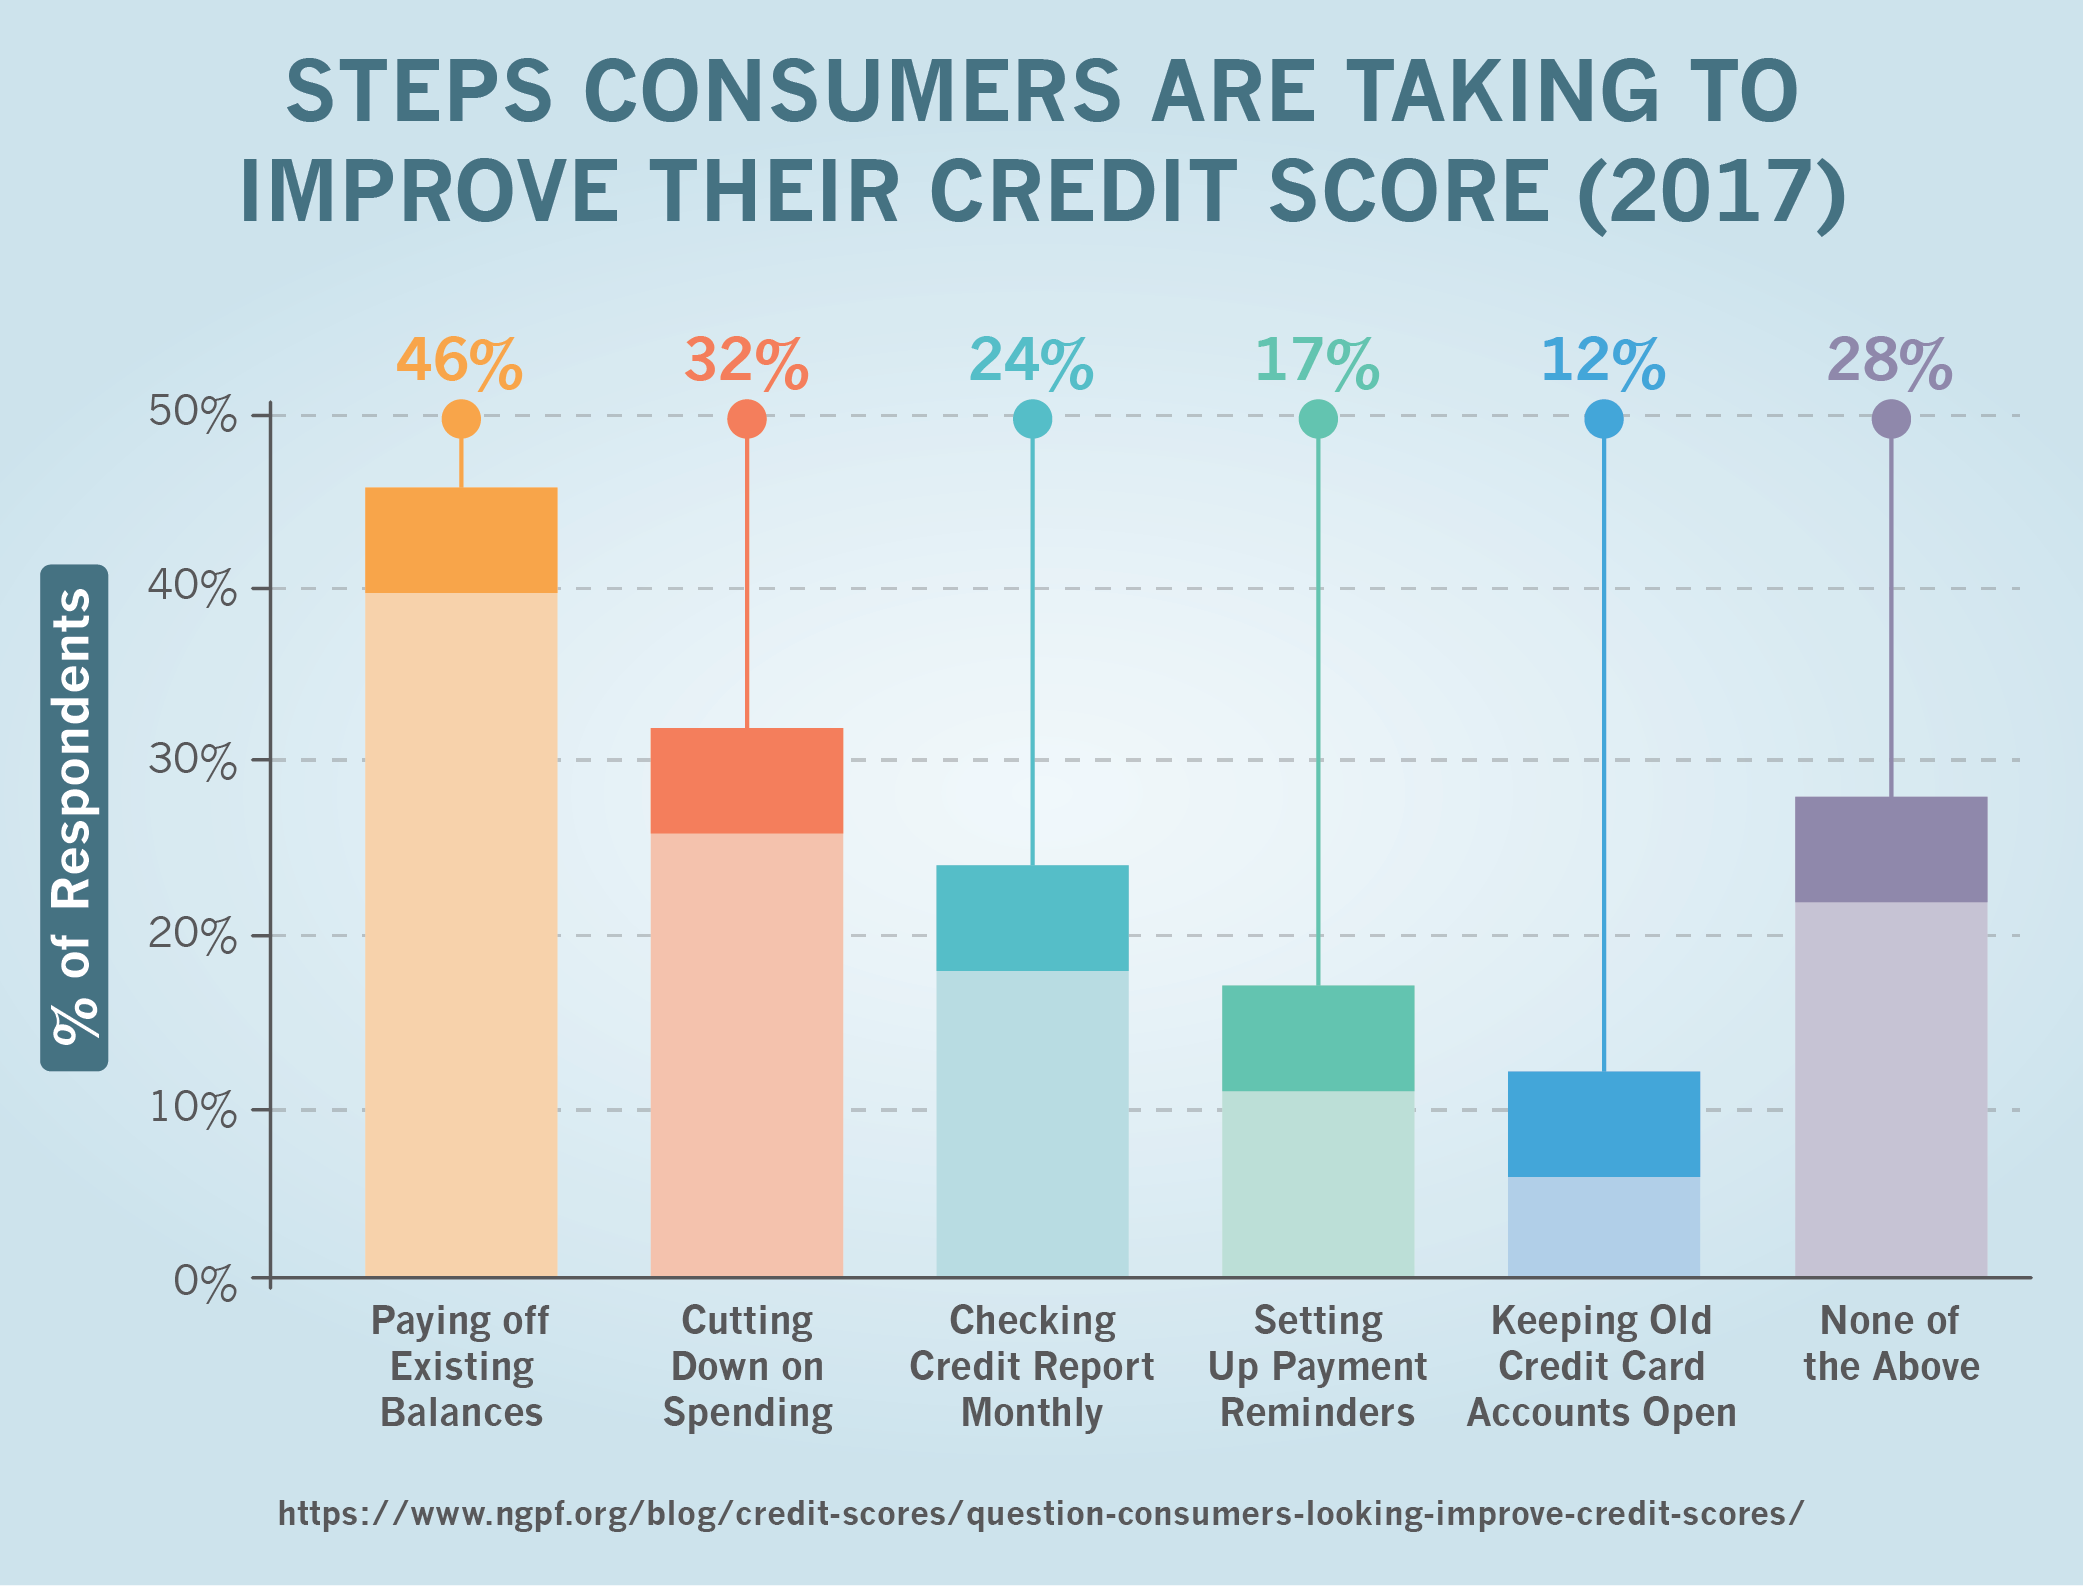 Steps Consumers Are Taking To Improve Their Credit Score (2017)